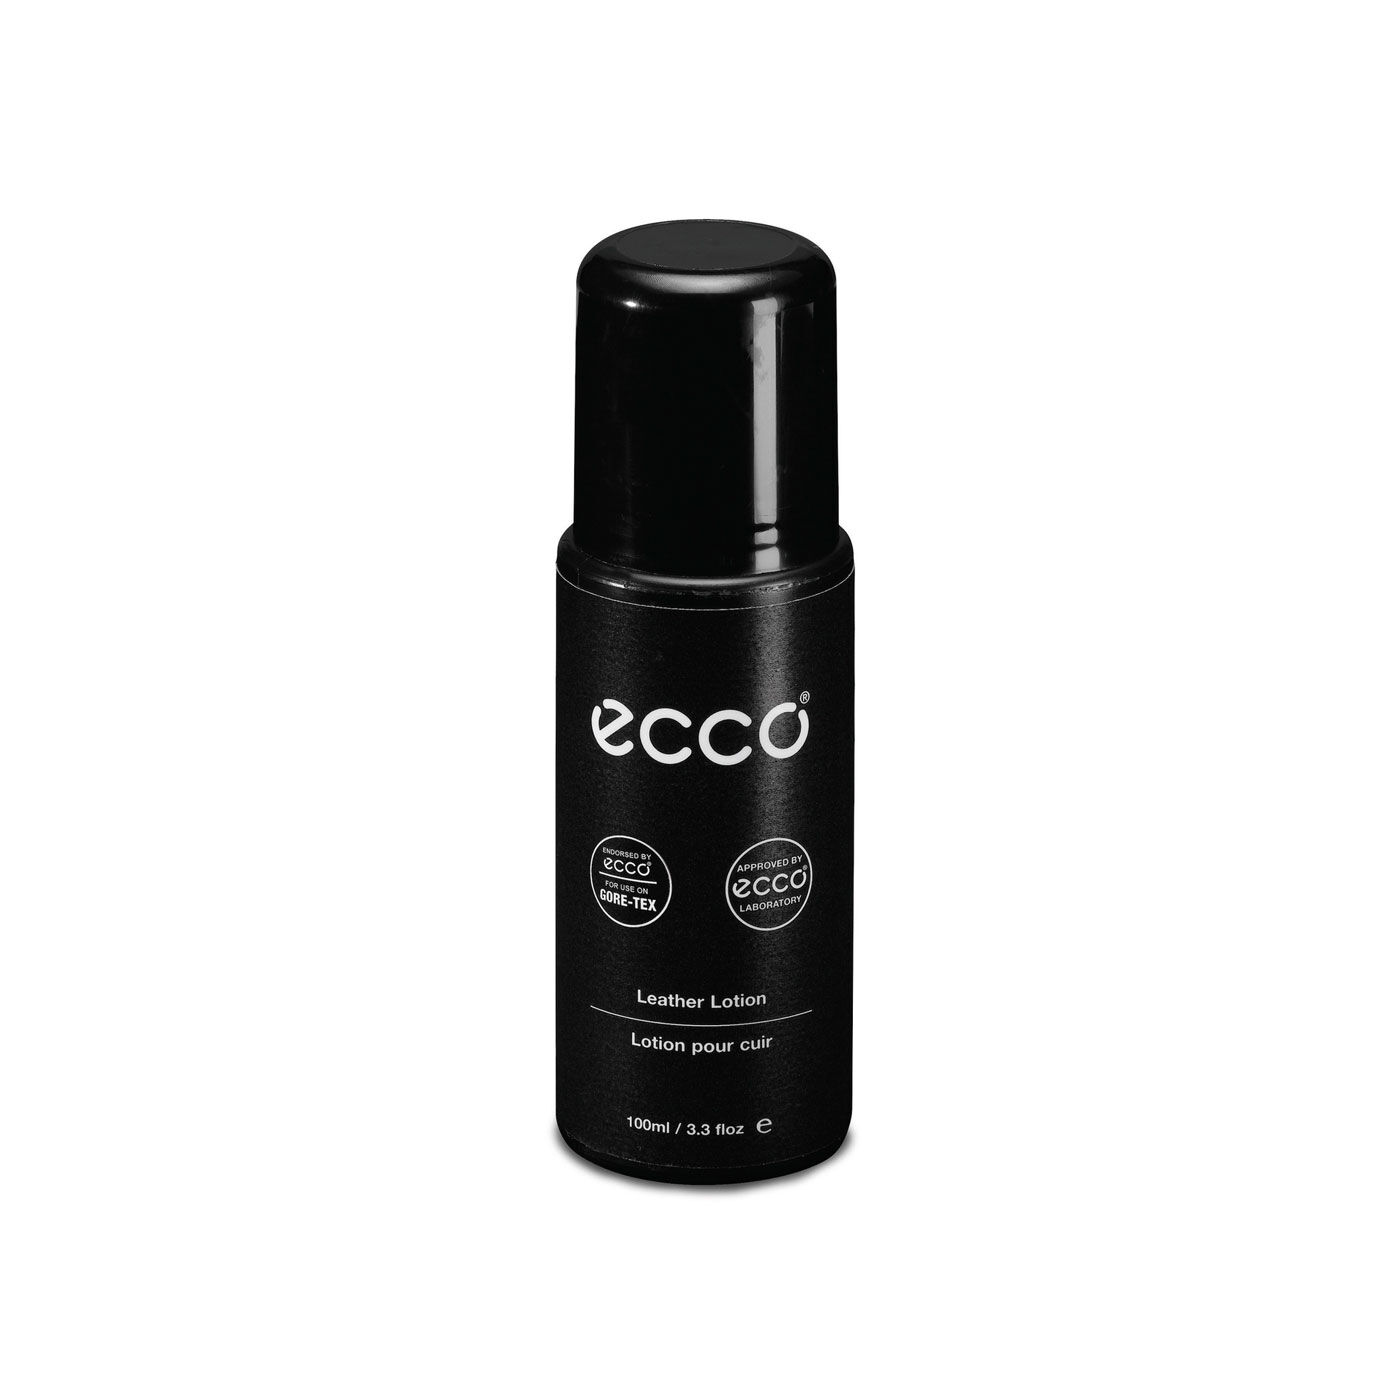 ecco smooth leather daily care cream